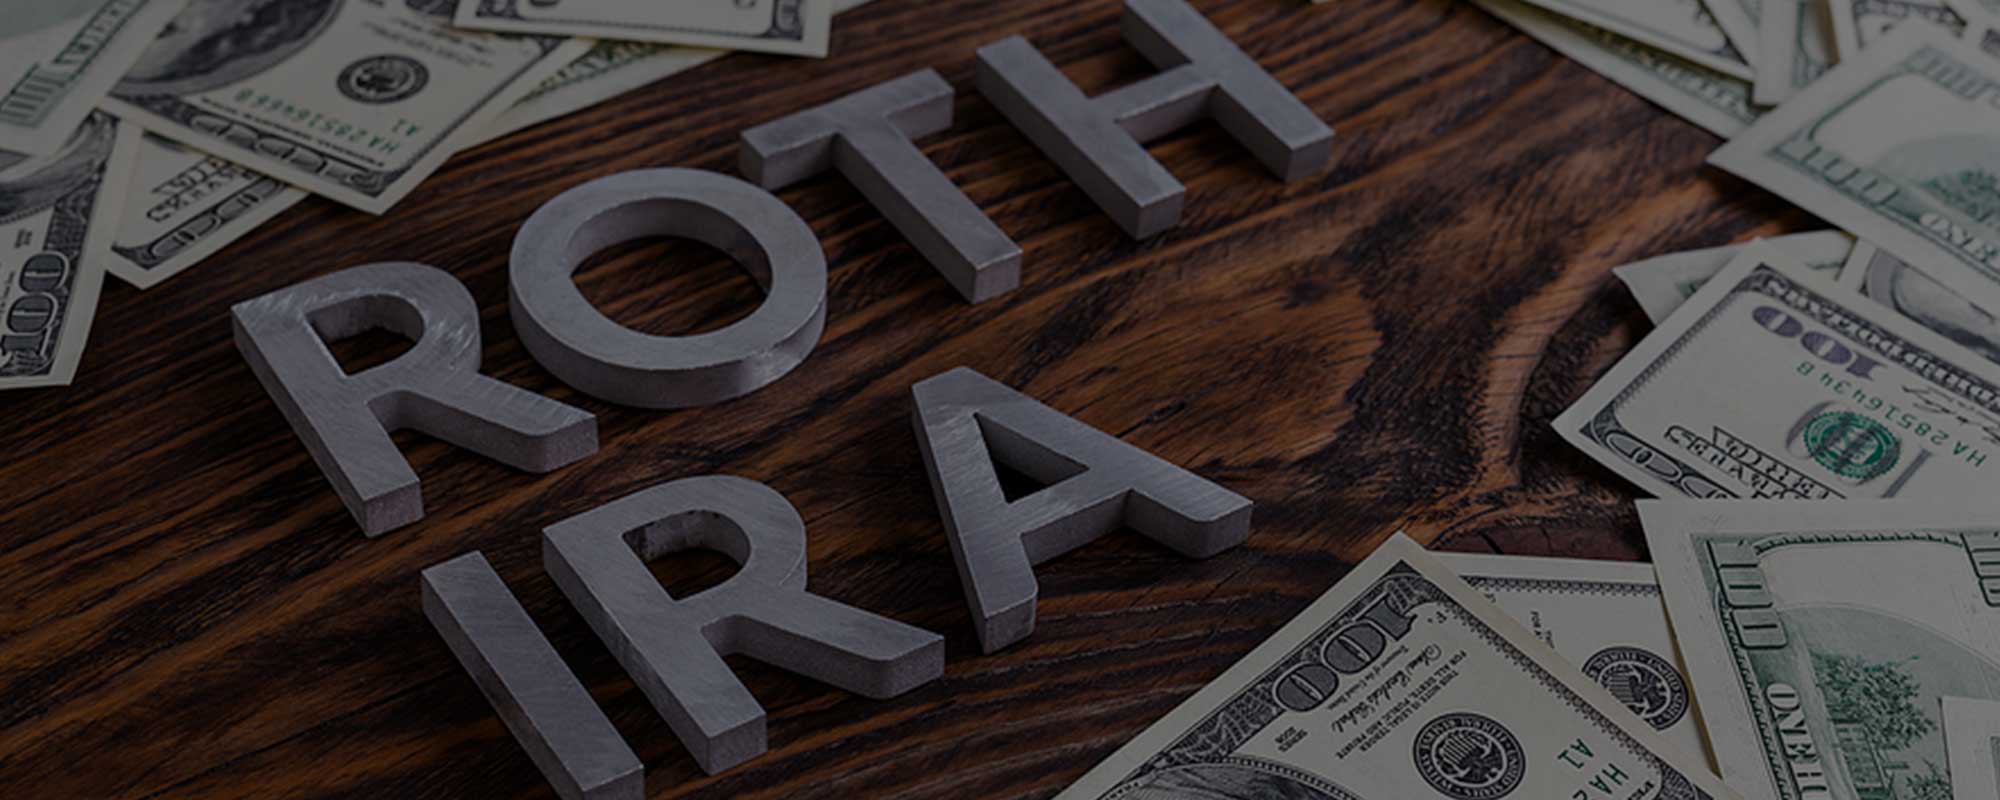 Bear Market Offers Opportunity for Roth IRA Conversions